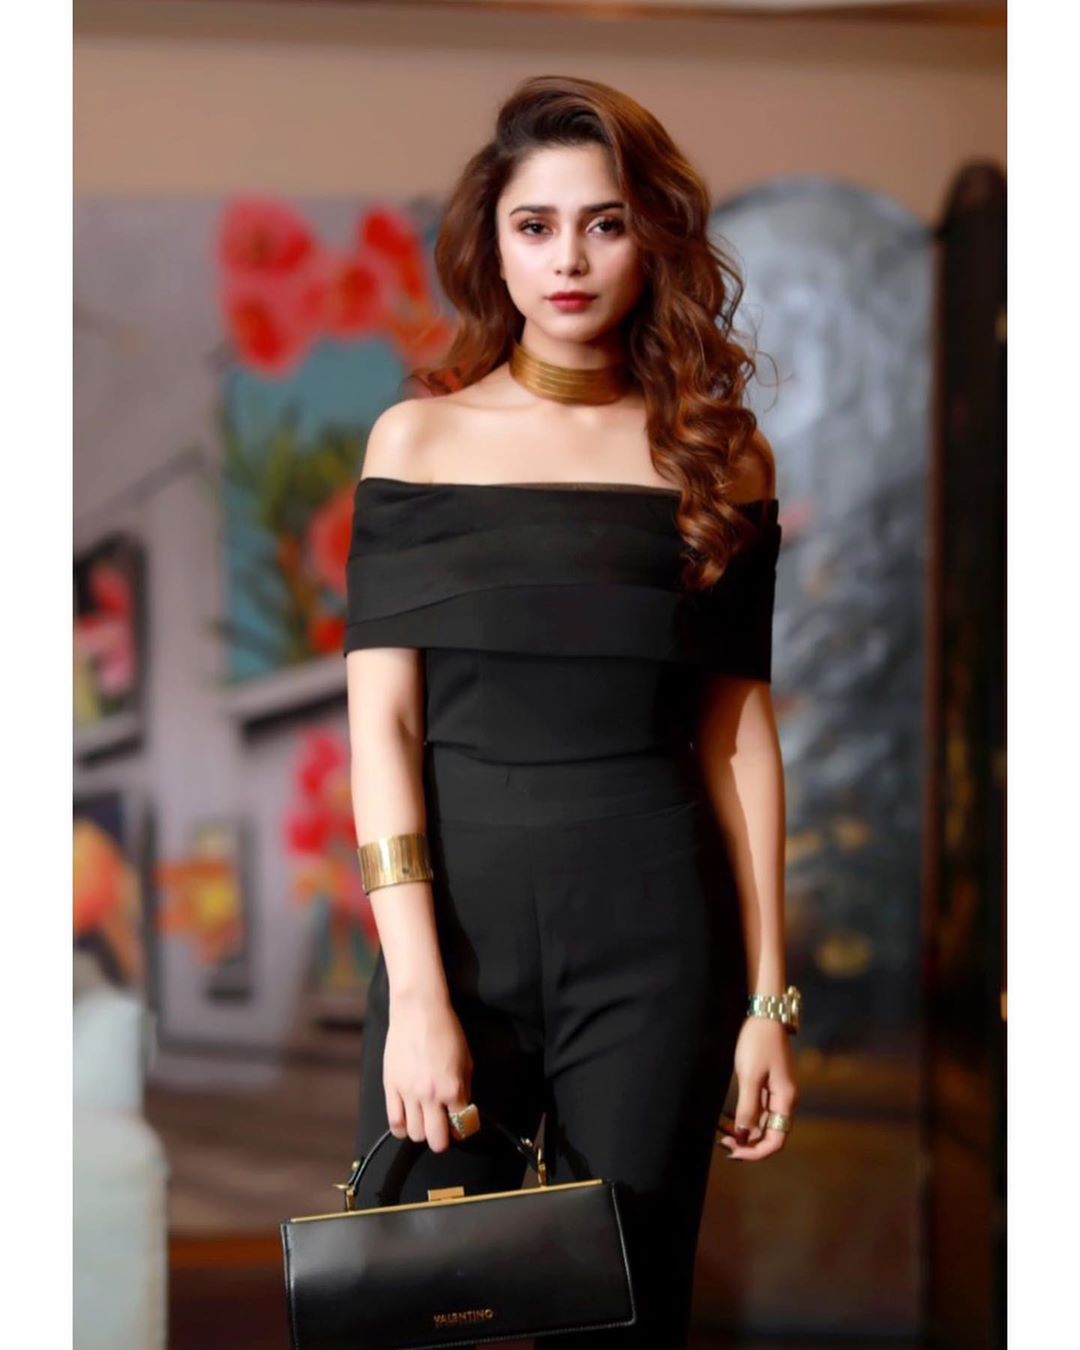 Beautiful Singer Aima Baig Looks Gorgeous in this Dress